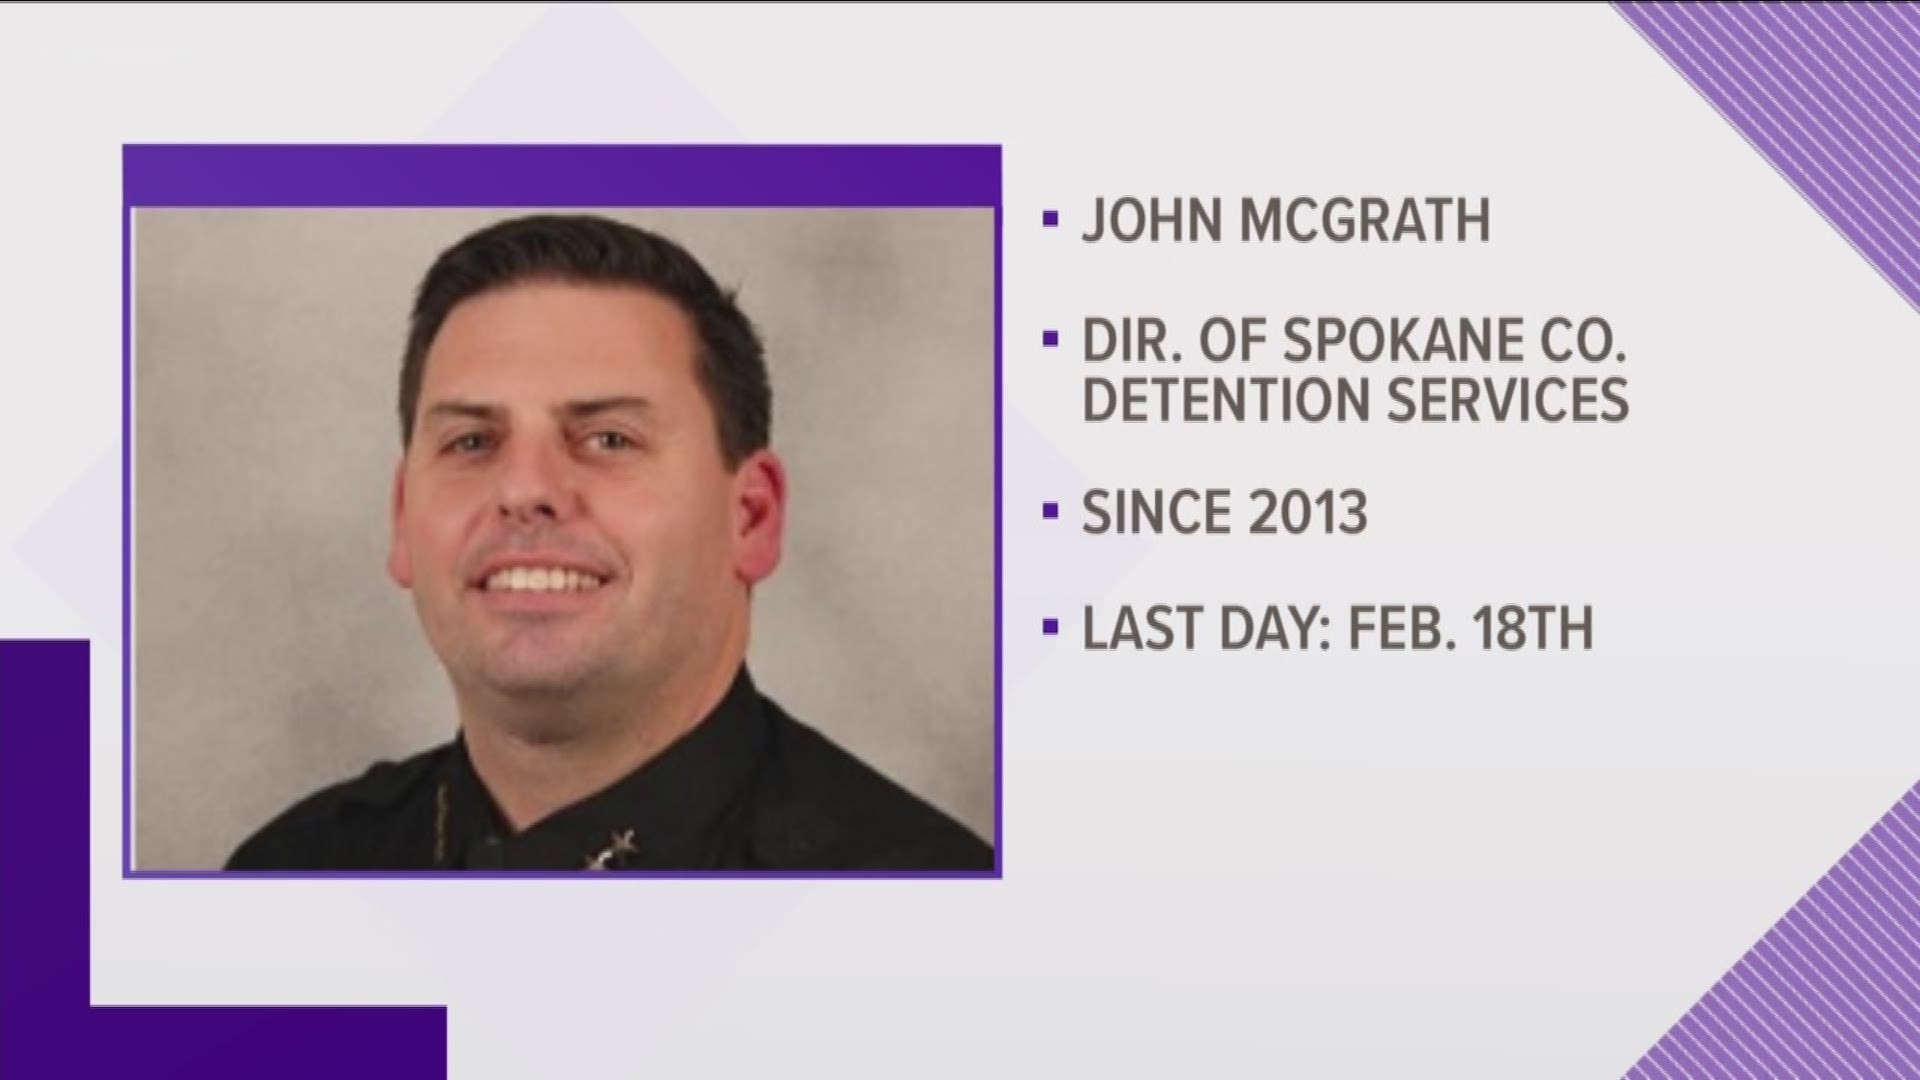 The head of the Spokane County jail is stepping down next month. John McGrath worked as the Director of Spokane County Detention Services since 20-13. In a letter to staff - McGrath said, it was simply the right time.